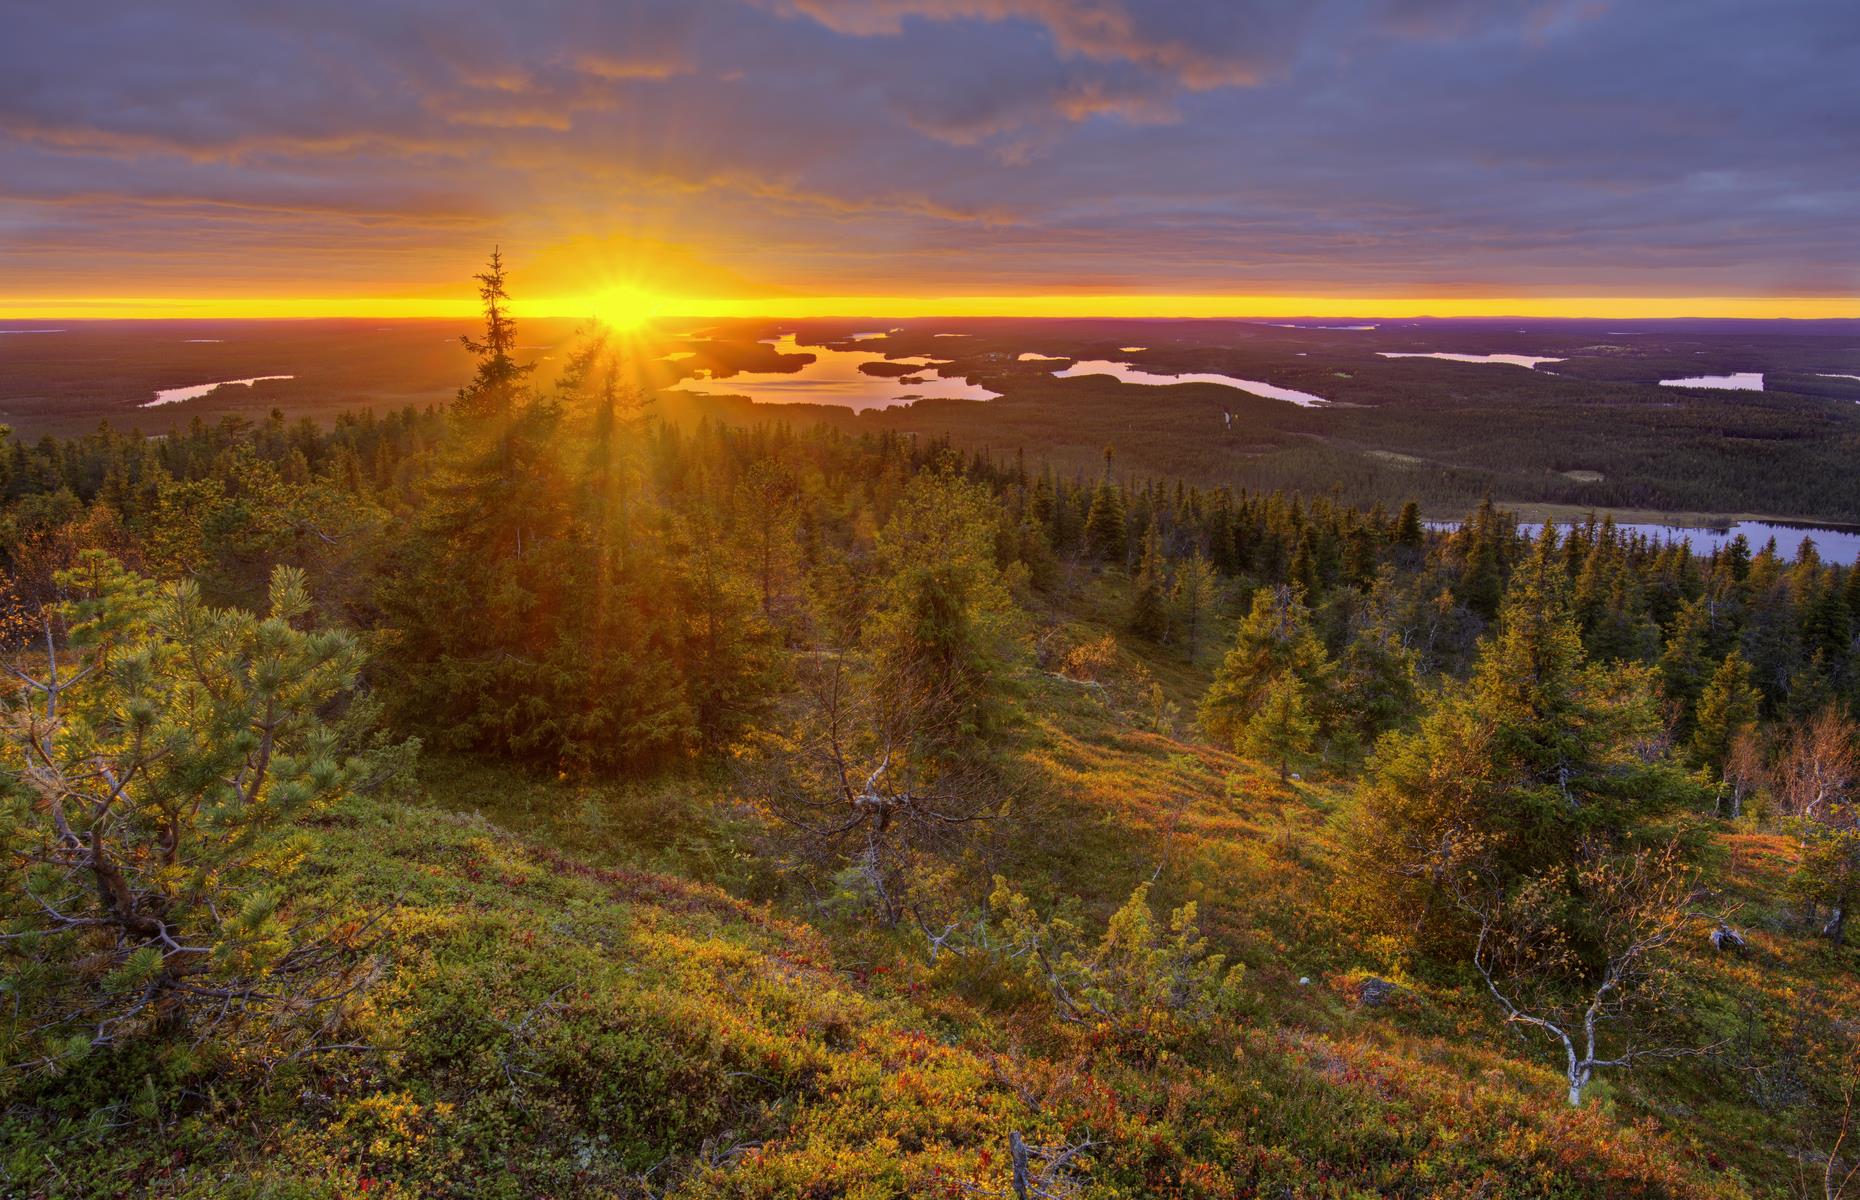 <p>In remote northeastern Finland, you'll find the 104-square-mile (269sq km) Oulanka National Park. Established in 1956, it’s a day's drive from the capital, Helsinki, although there’s an airport in the tiny town of Kuusamo, only 50 minutes away. It’s twice been expanded (in 1982 and 1989); there are evergreen forests, turbulent rapids and Siberian-esque natural beauty, as the park shares a border with Russia.</p>